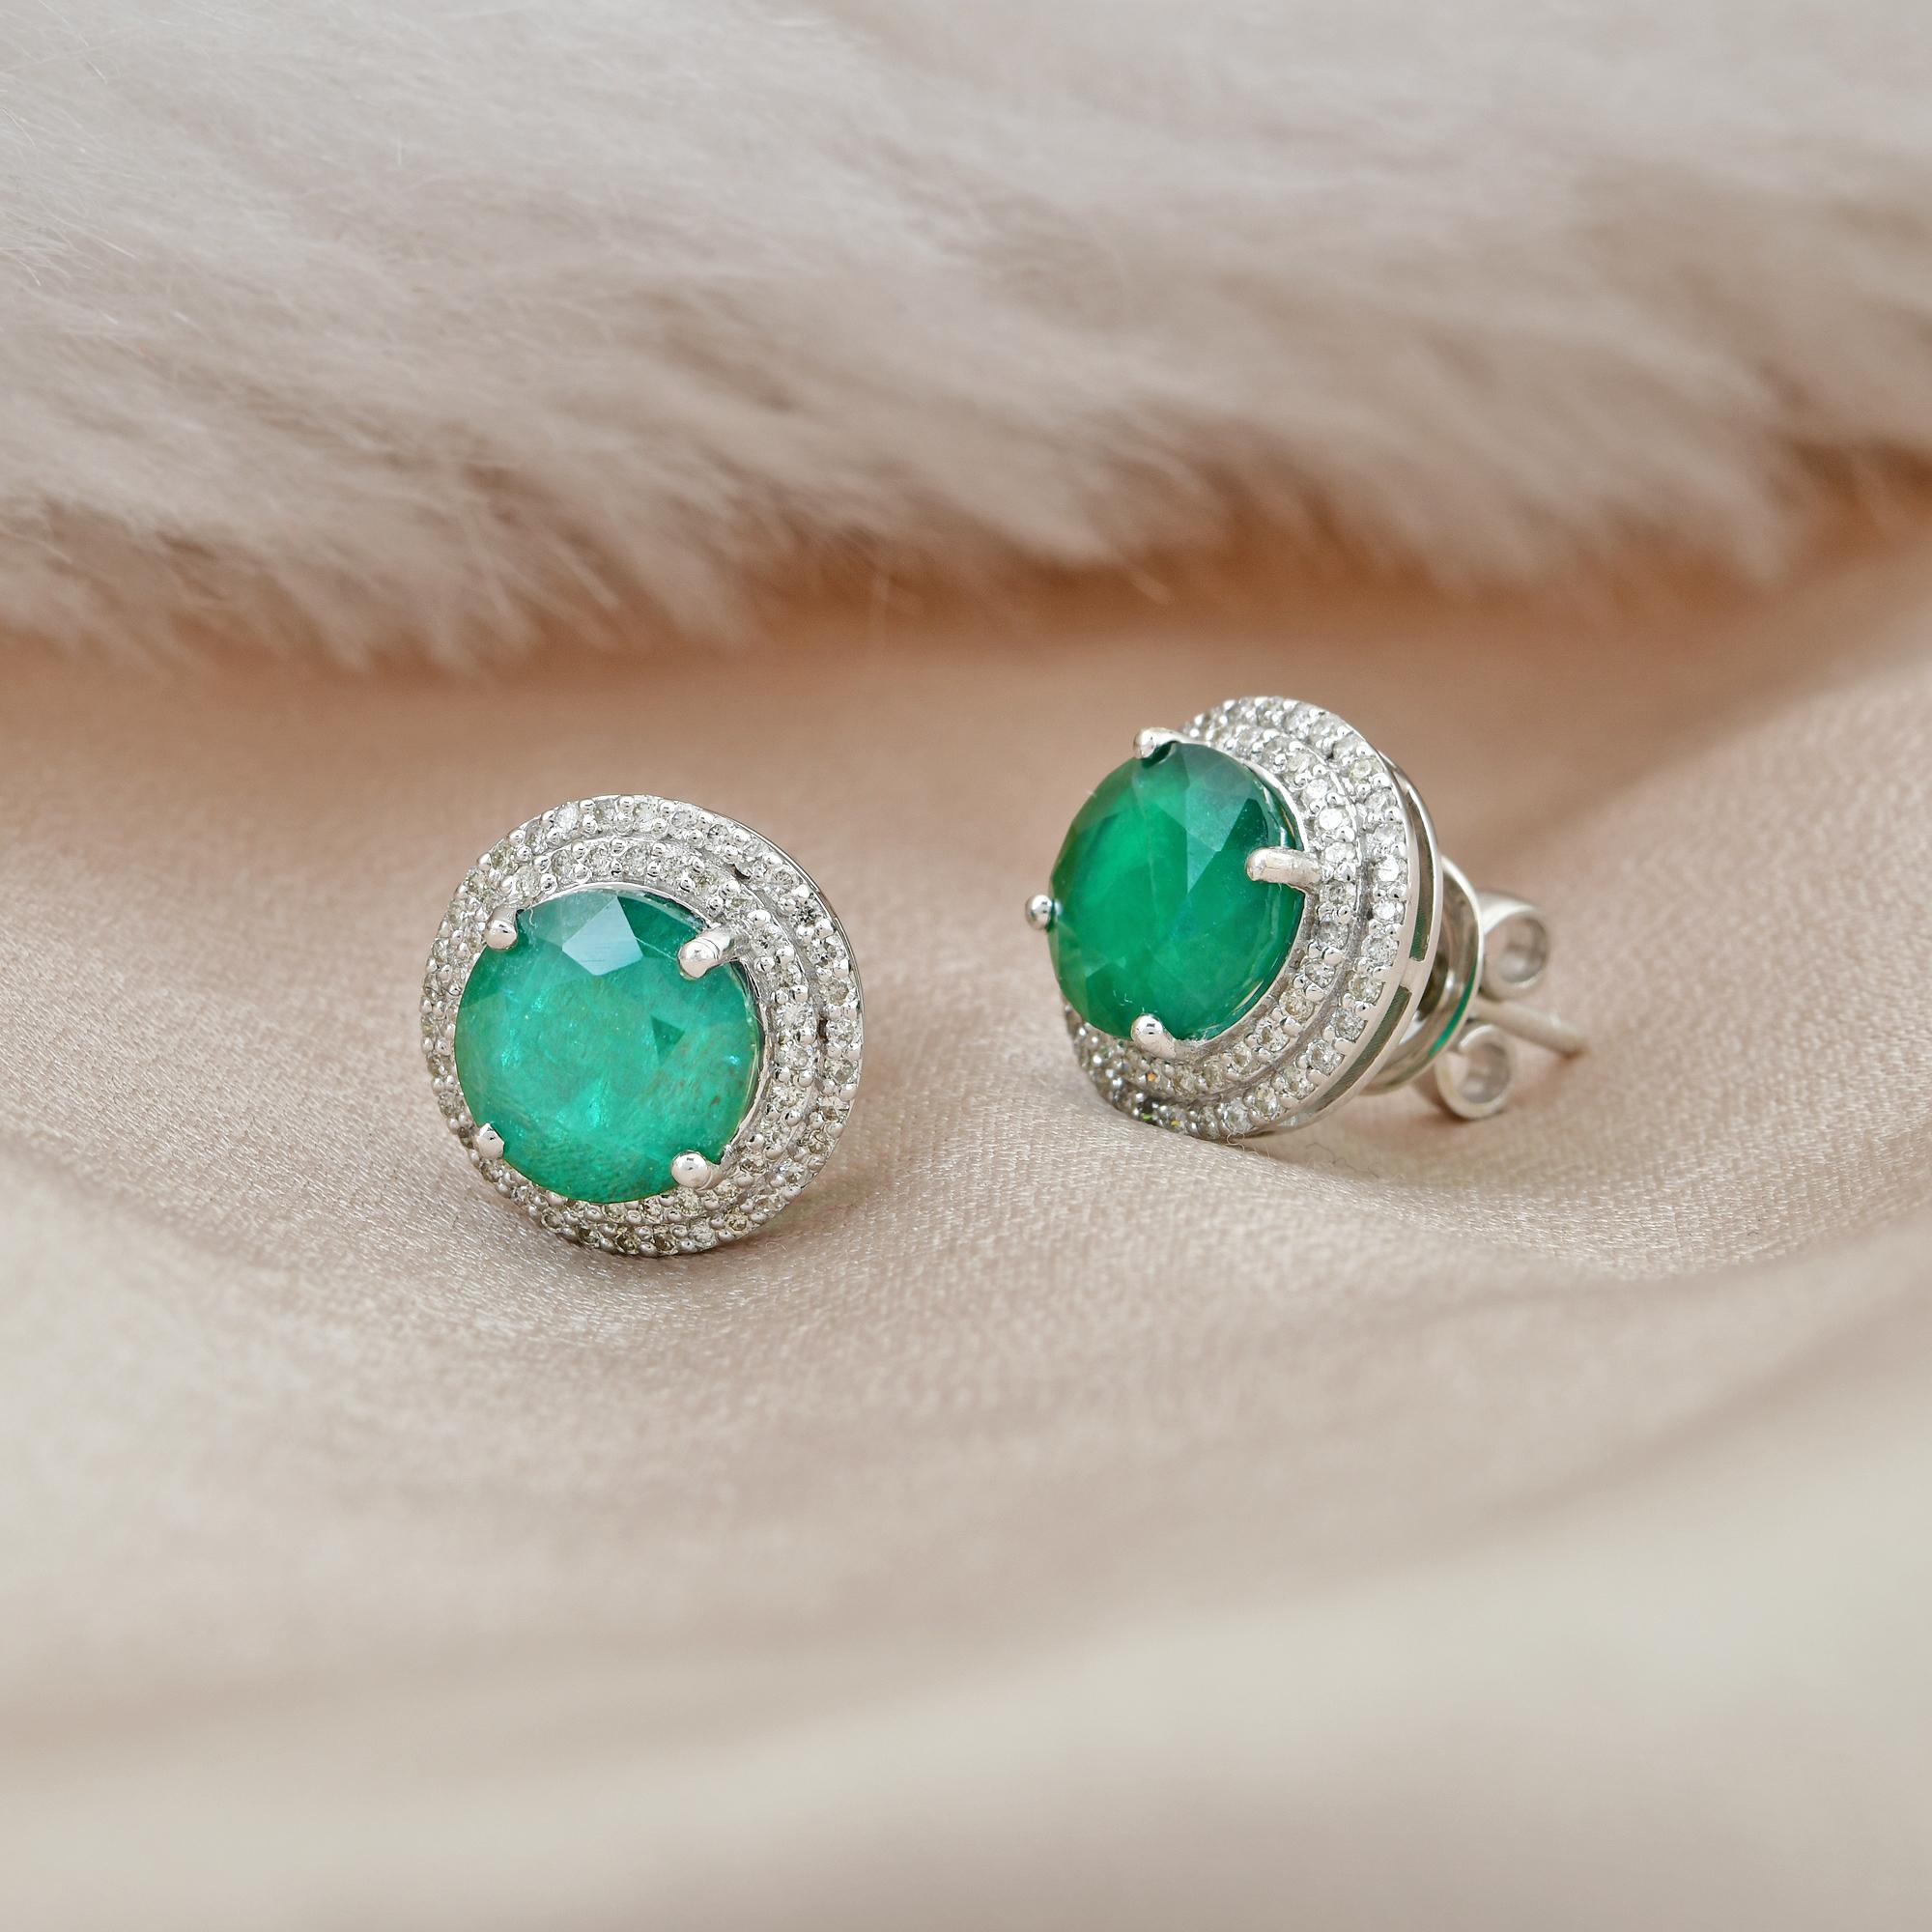 Modern Natural Emerald Gemstone Stud Earrings Diamond Pave Solid 18k White Gold Jewelry For Sale